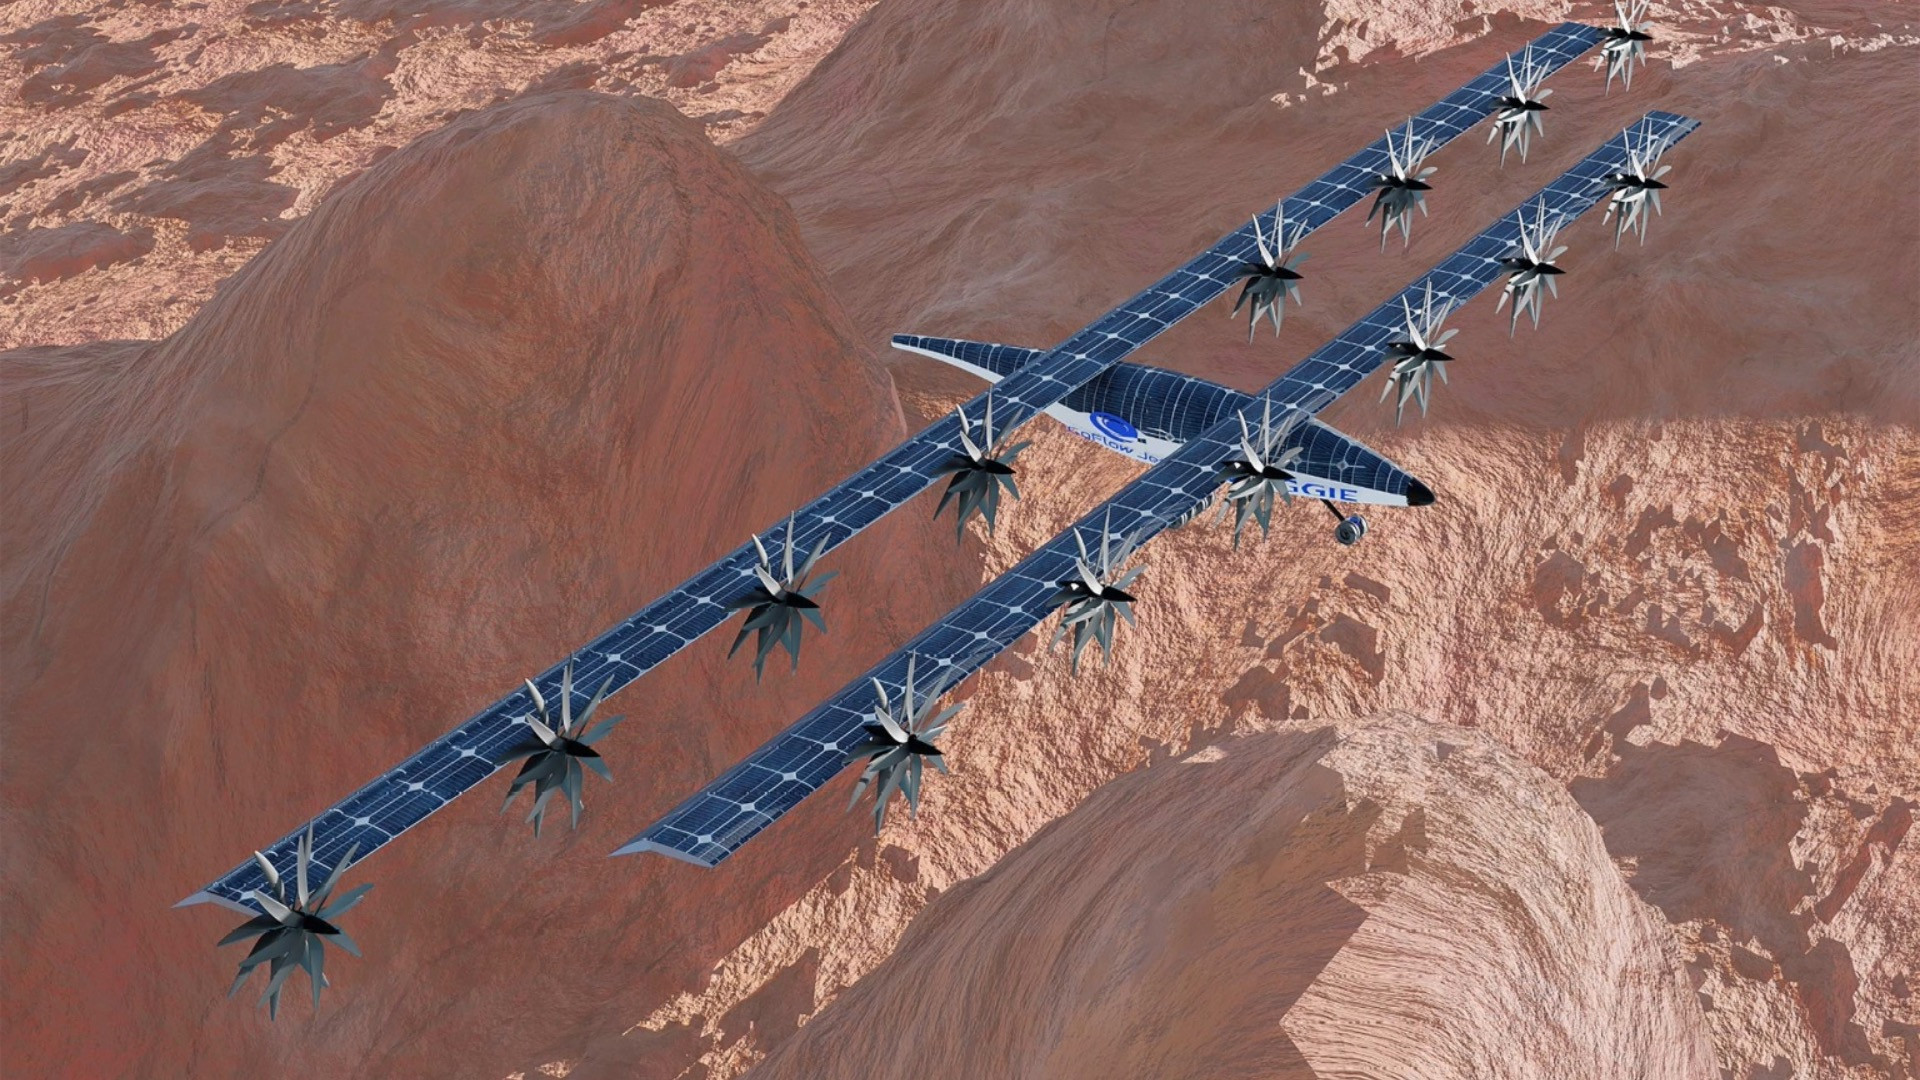 MAGGIE: NASA Unveils Ambitious Plan for a Solar-Powered Electric Plane in Martian Exploration